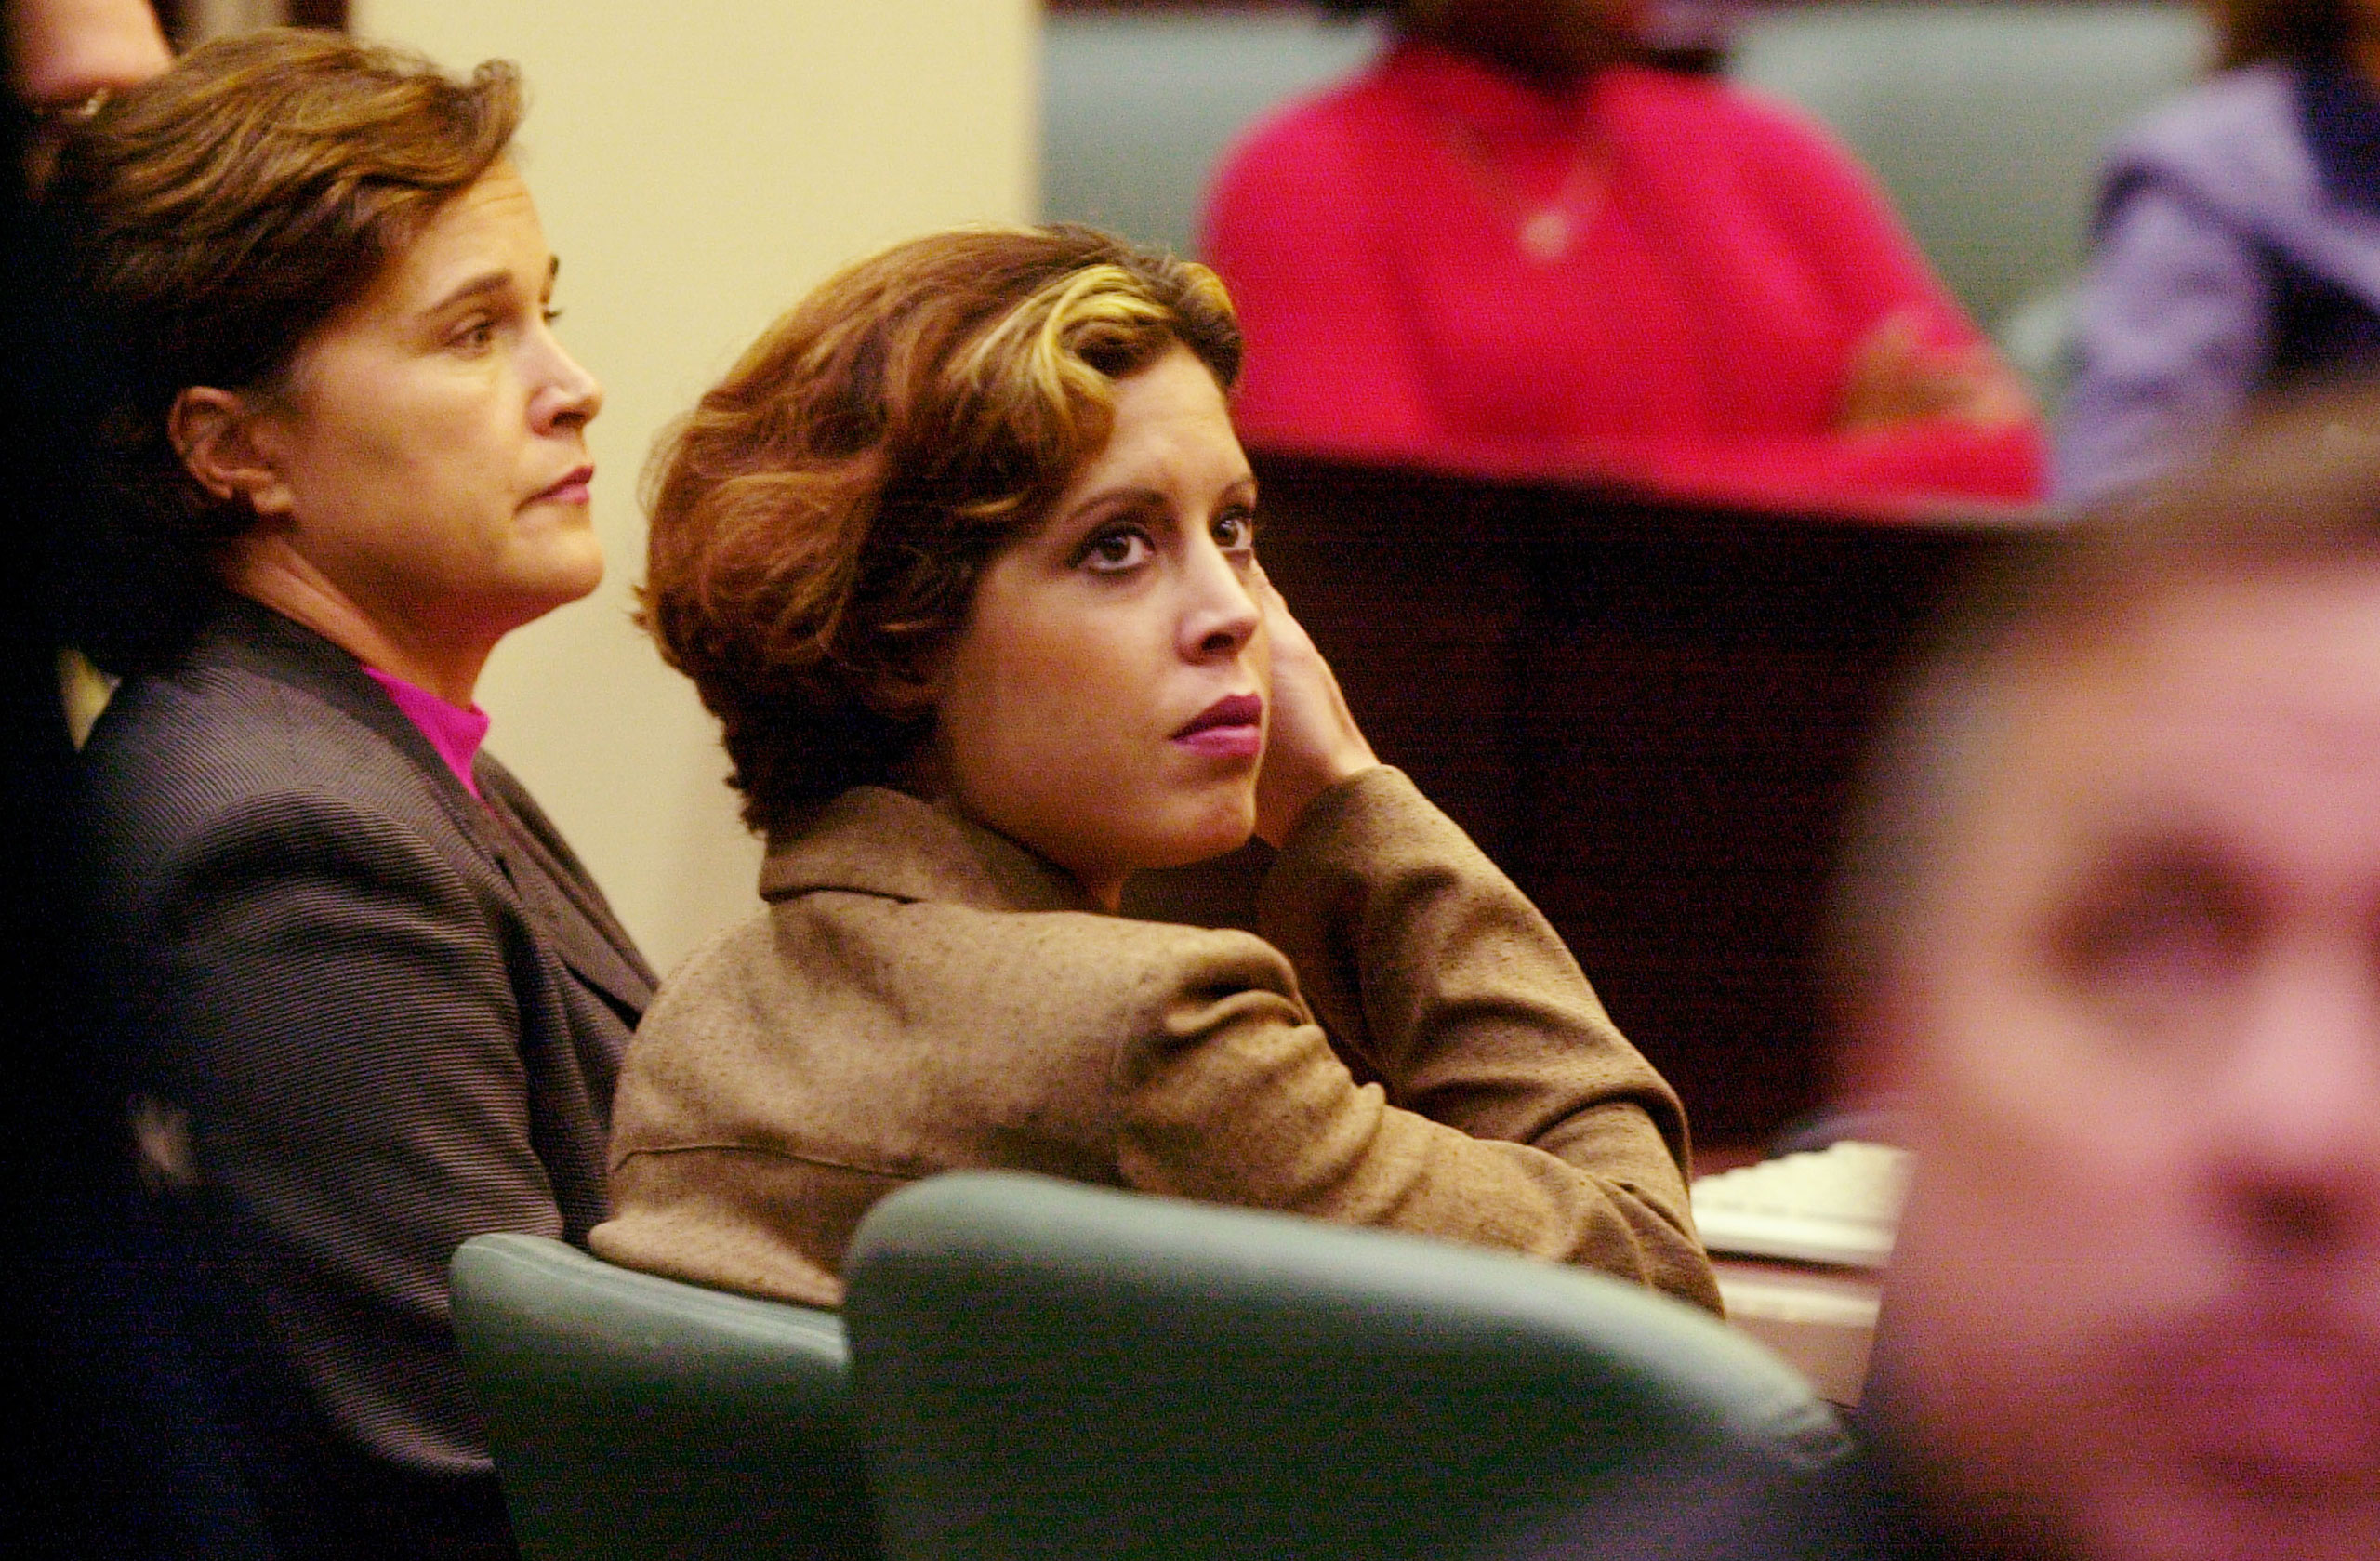 Noelle Bush (center) waits with her aunt Dorothy Bush Koch (left) for the start of her court hearing in an Orange County courtroom on Oct. 17, 2002 in Orlando, Fla. (Red Huber—Getty Images)